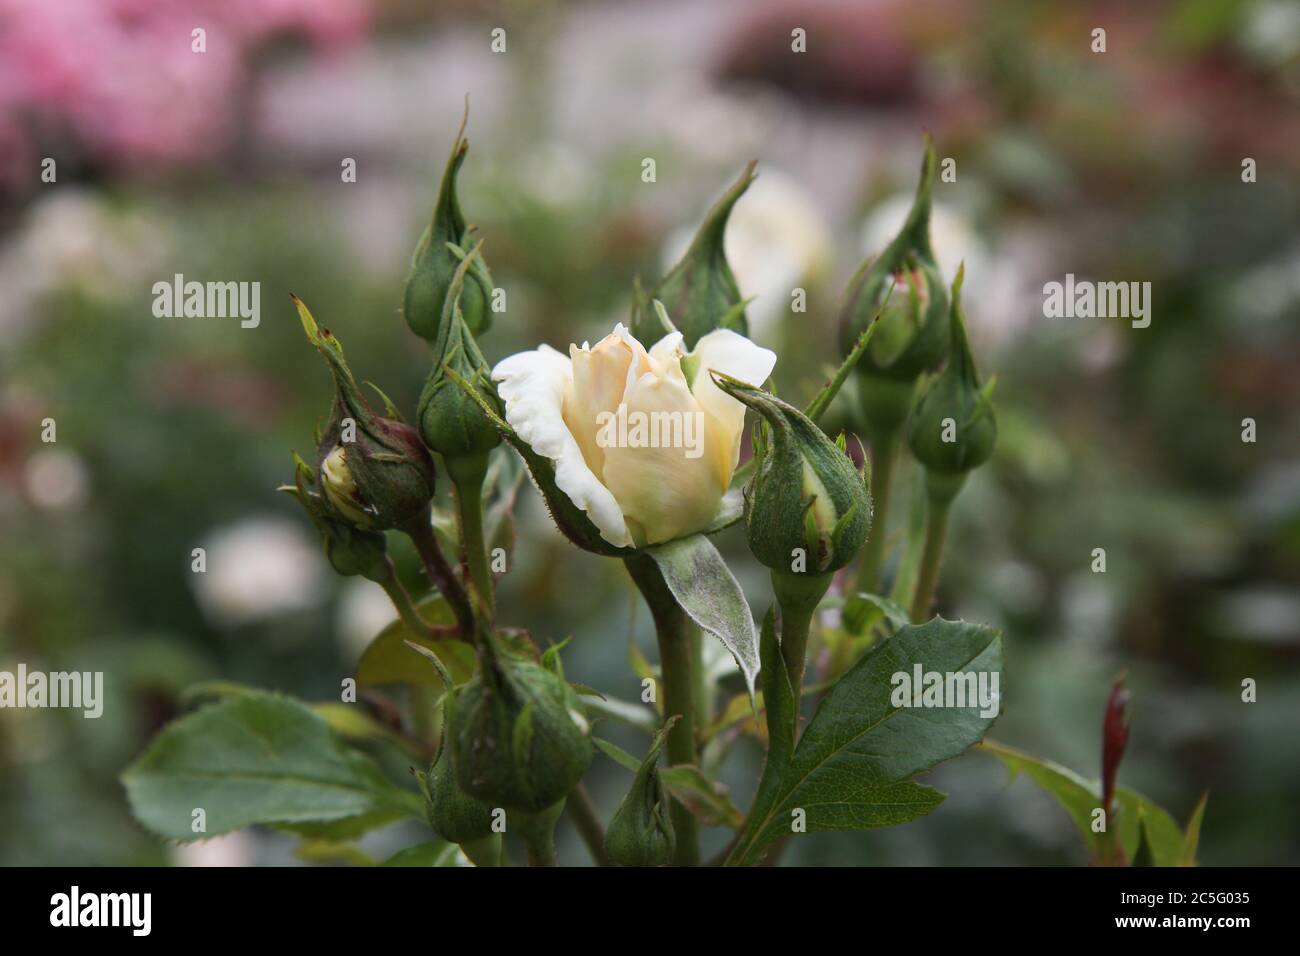 Blossoming  white rose  between closed rose buds. Symbol for purity. Stock Photo